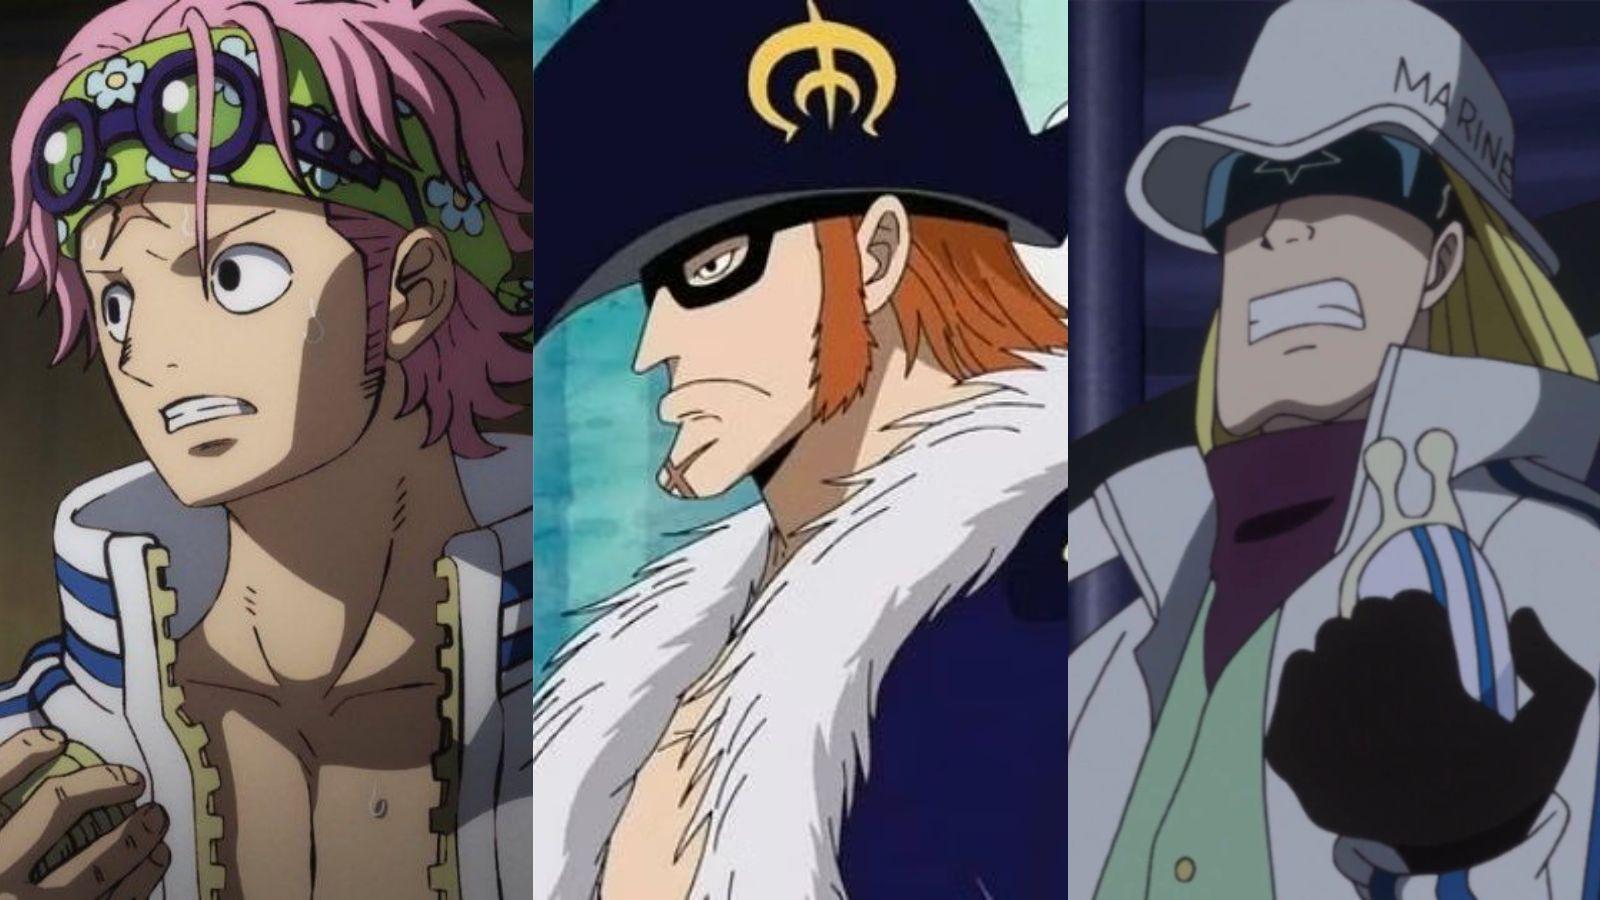 An image featuring SWORD members in One Piece